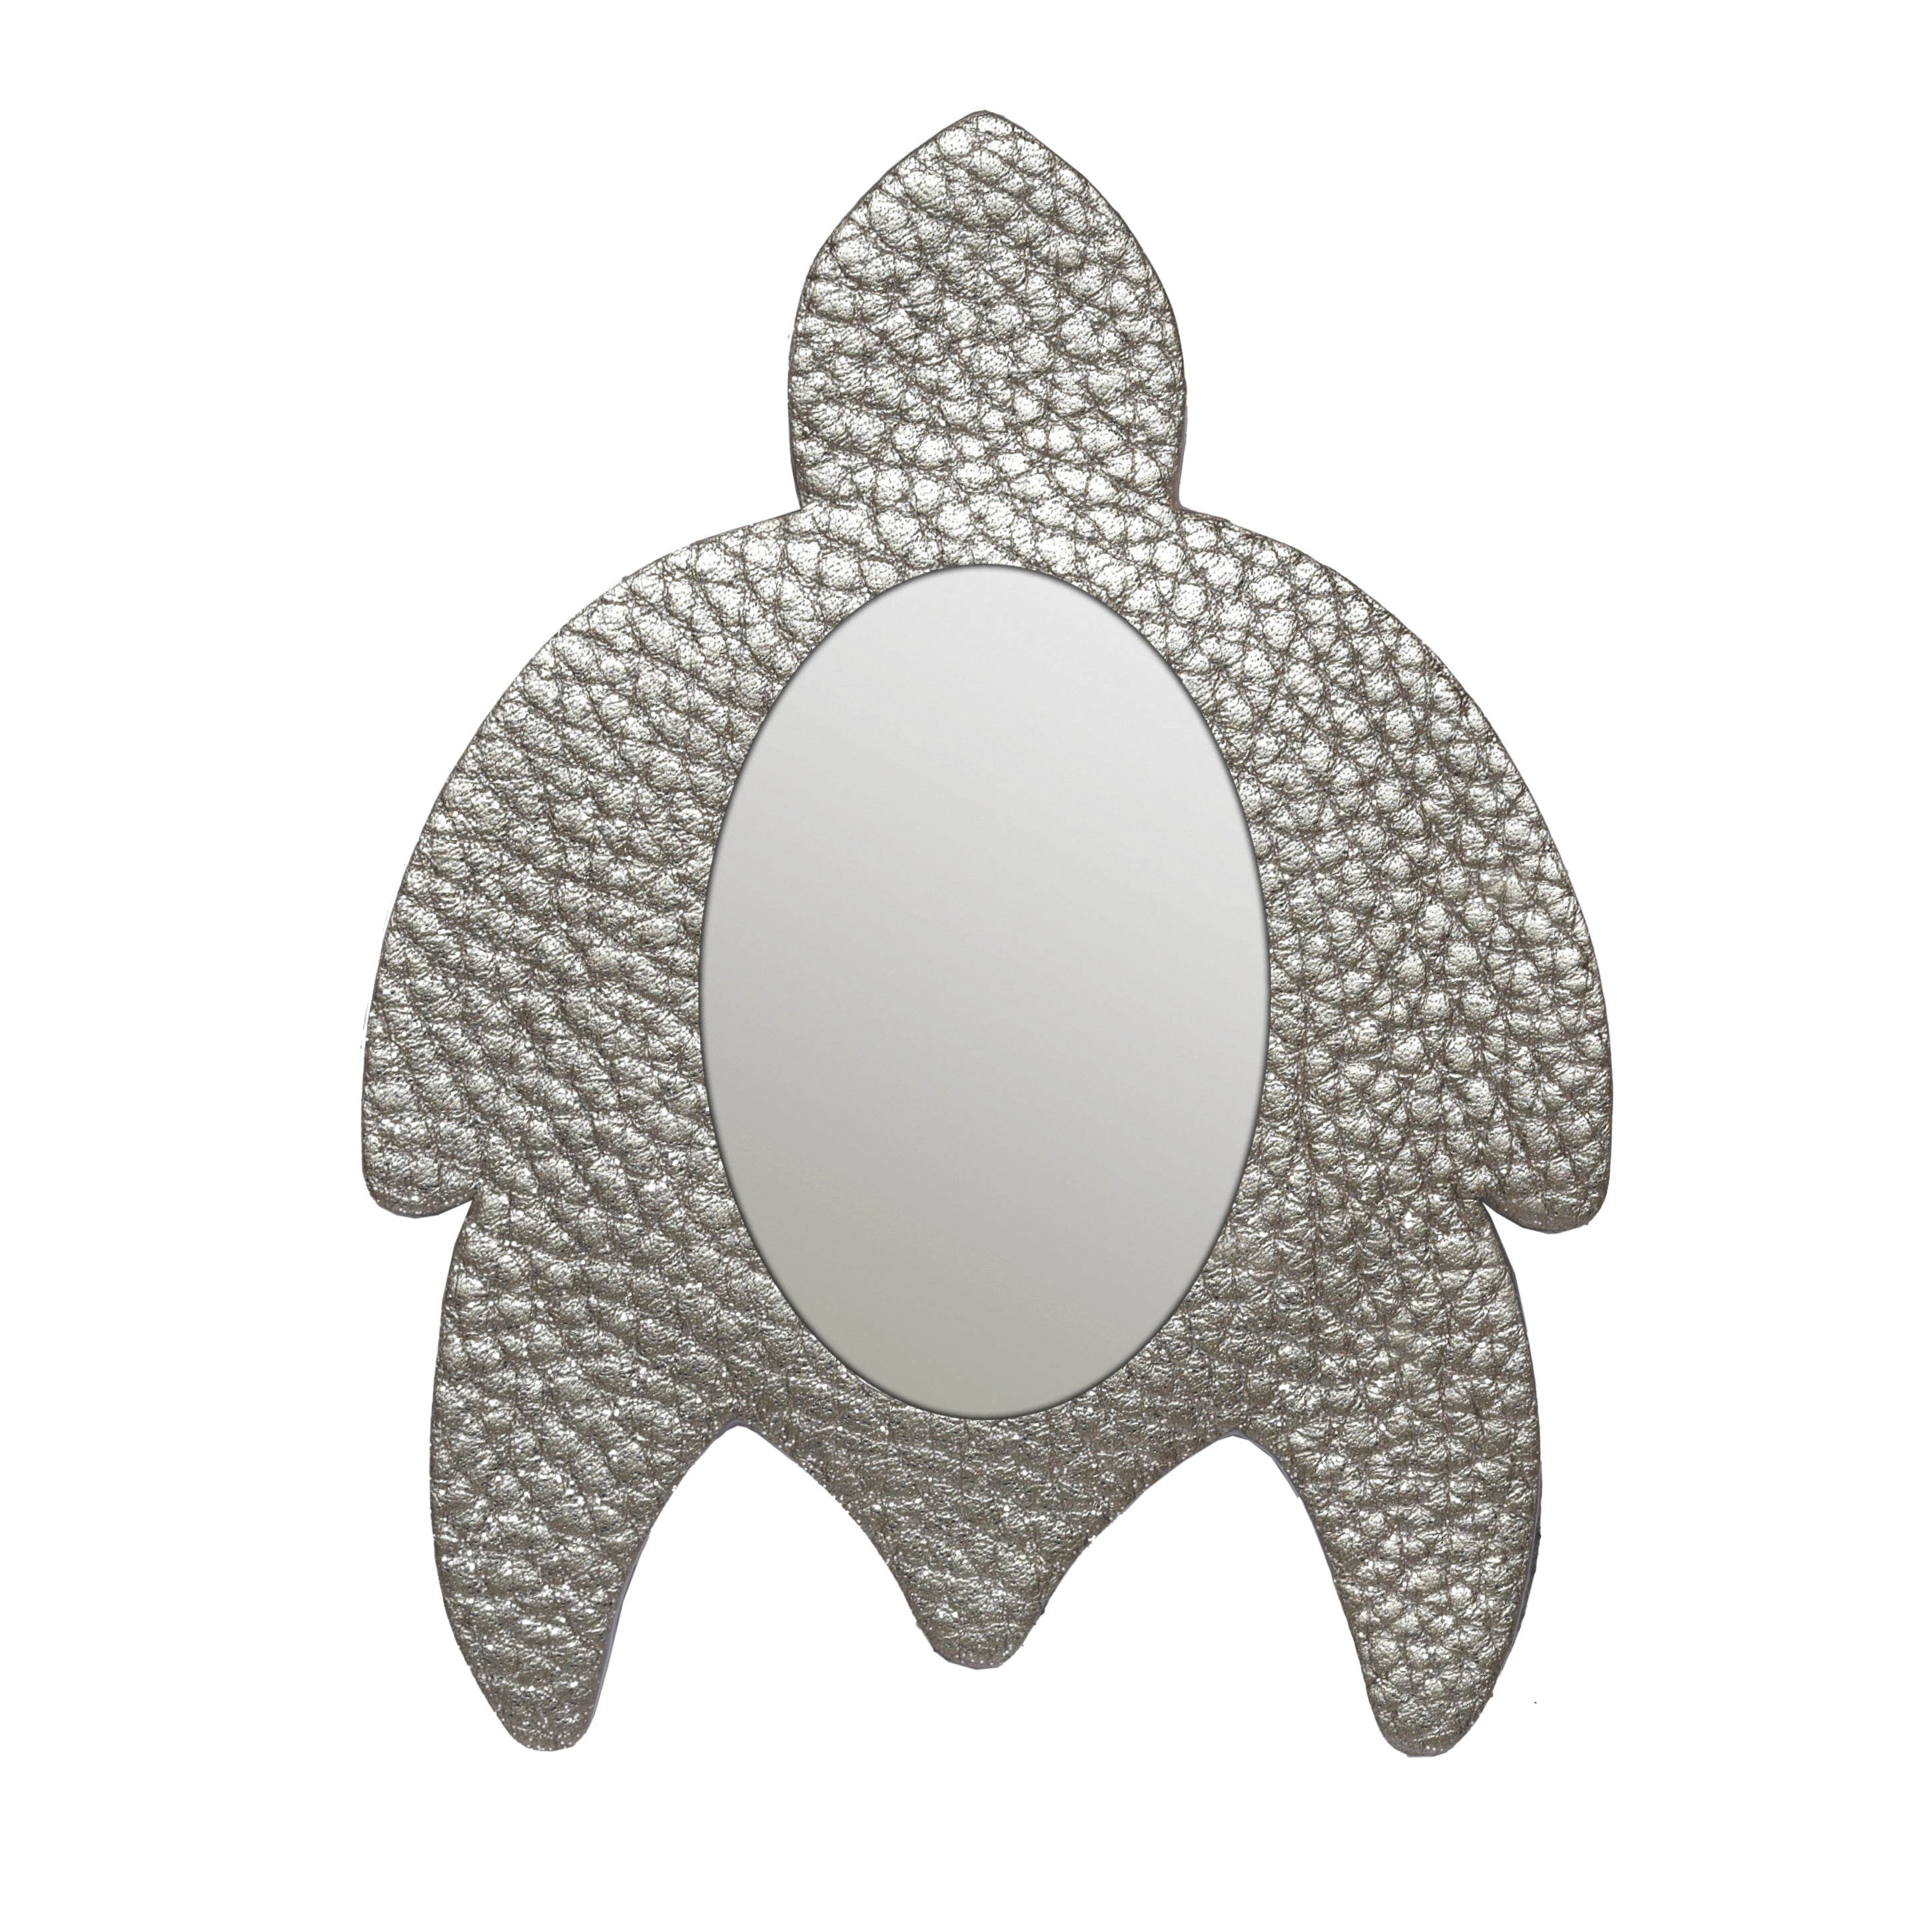 THE LUXAC SIGNATURE TURTLE HAND MIRROR